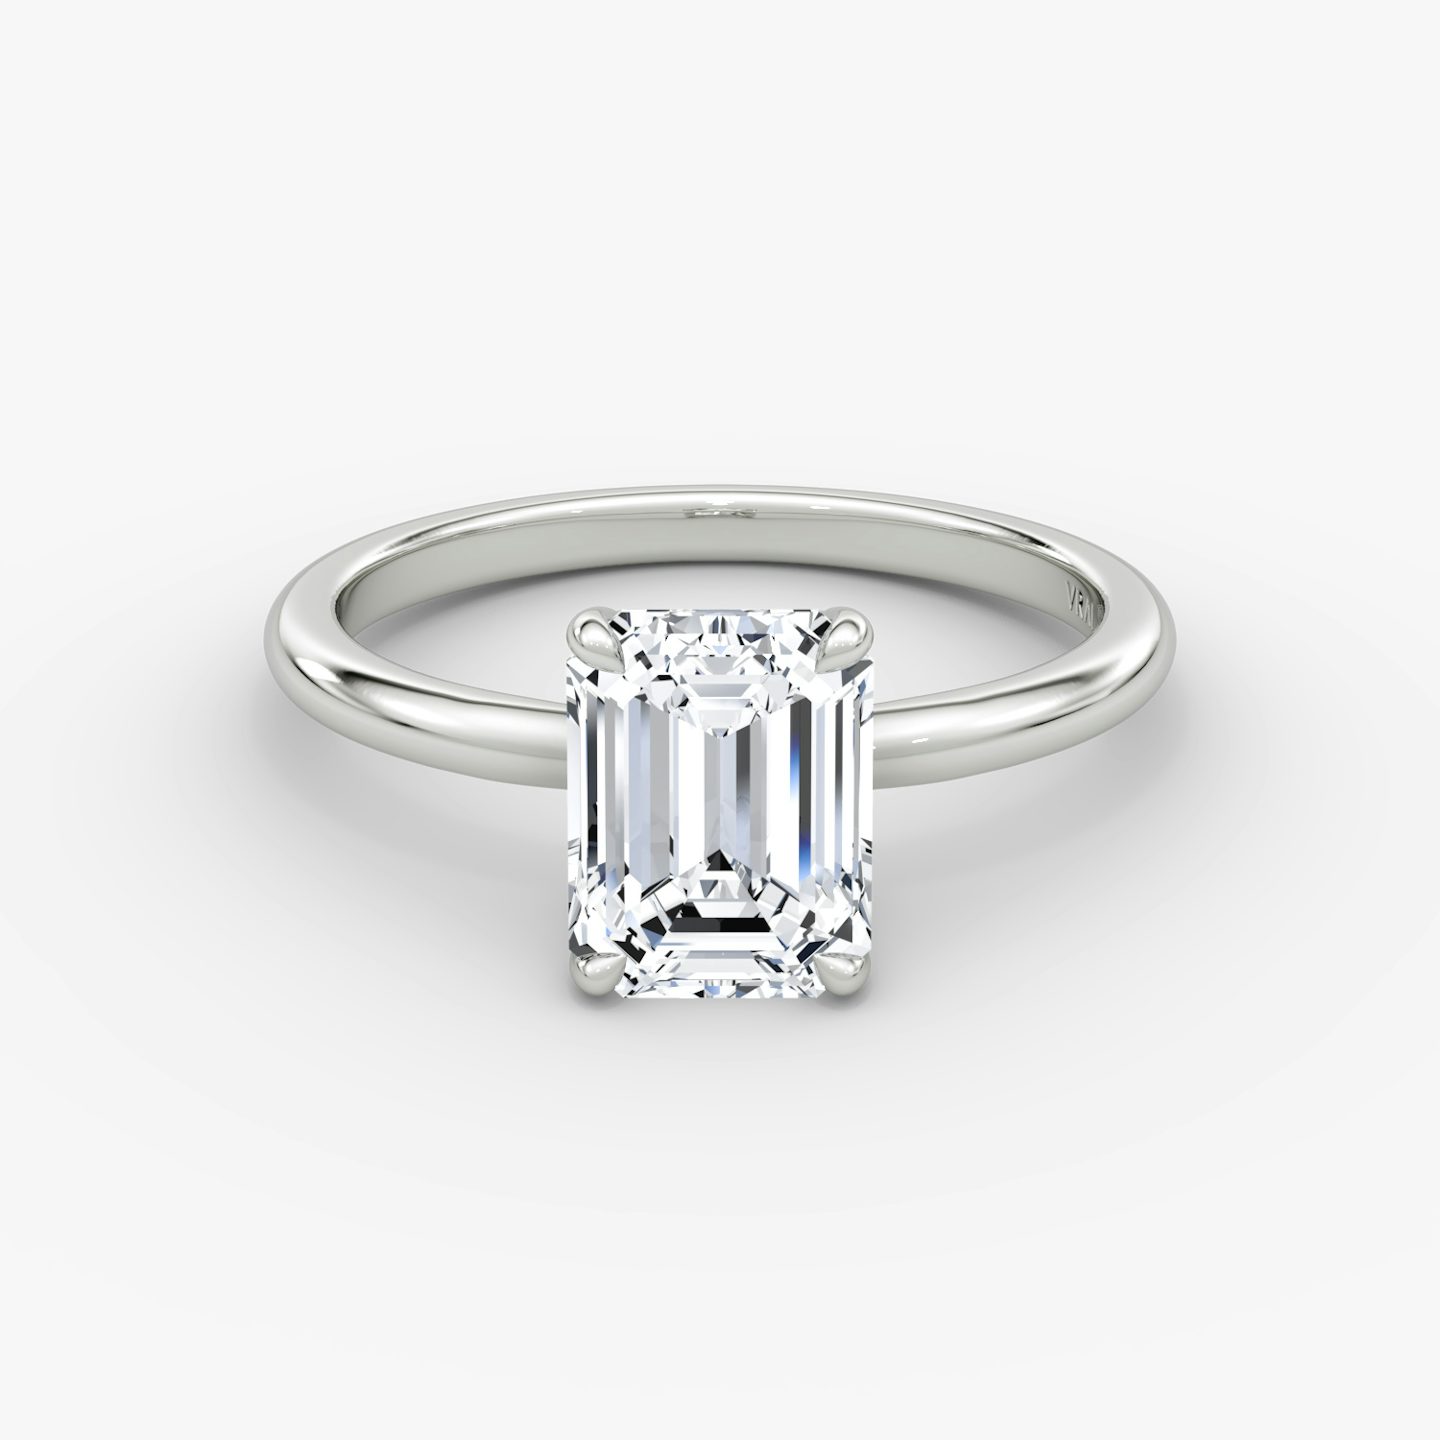 undefined | Emerald | 18k | 18k White Gold | Band width: Standard | Band: Plain | Setting style: Plain | Diamond orientation: vertical | Carat weight: See full inventory